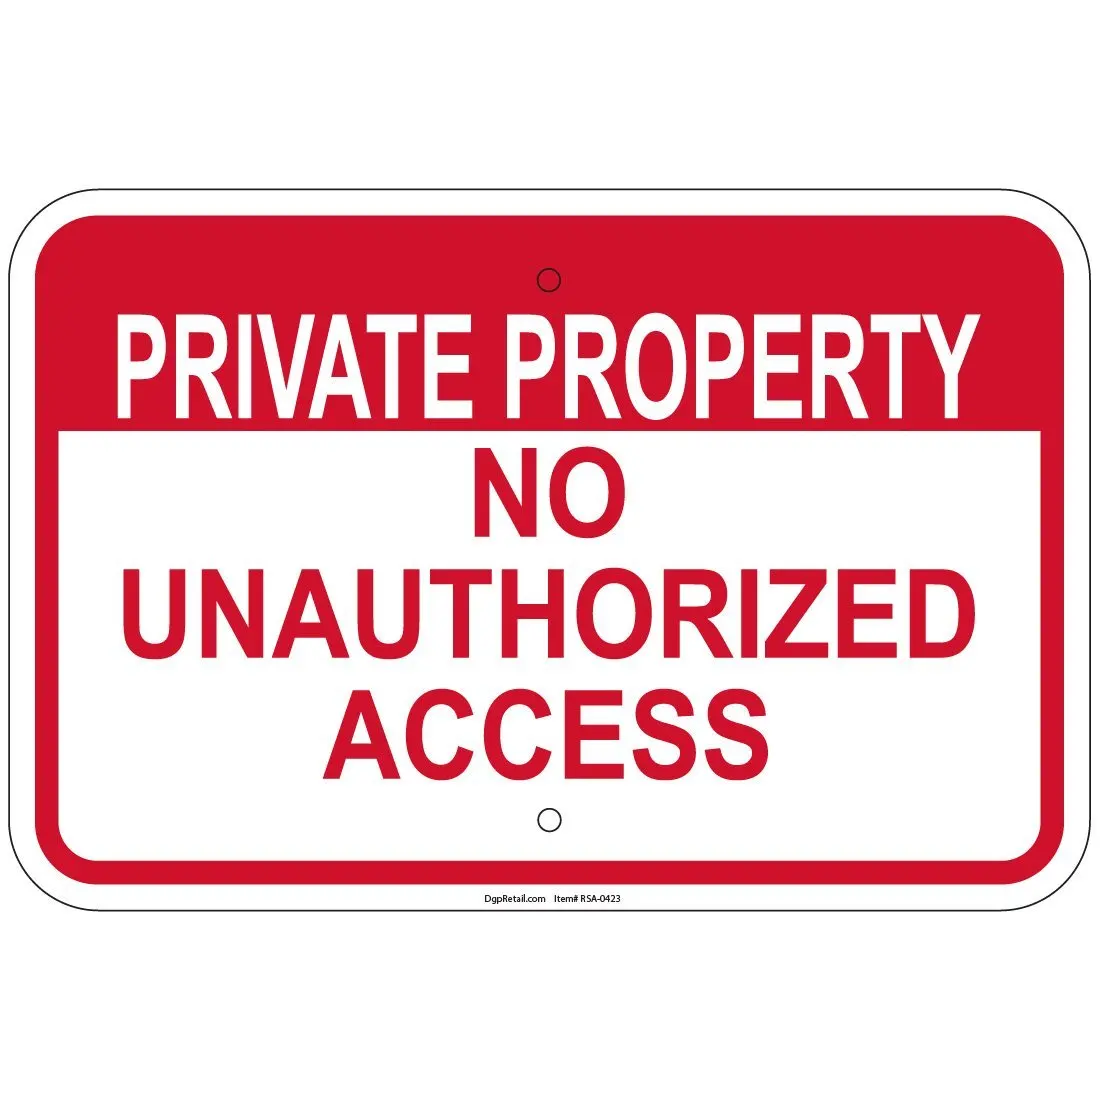 Unauthorized access. Unauthorized access is prohibited. Private property. Private property do not access. Access 12